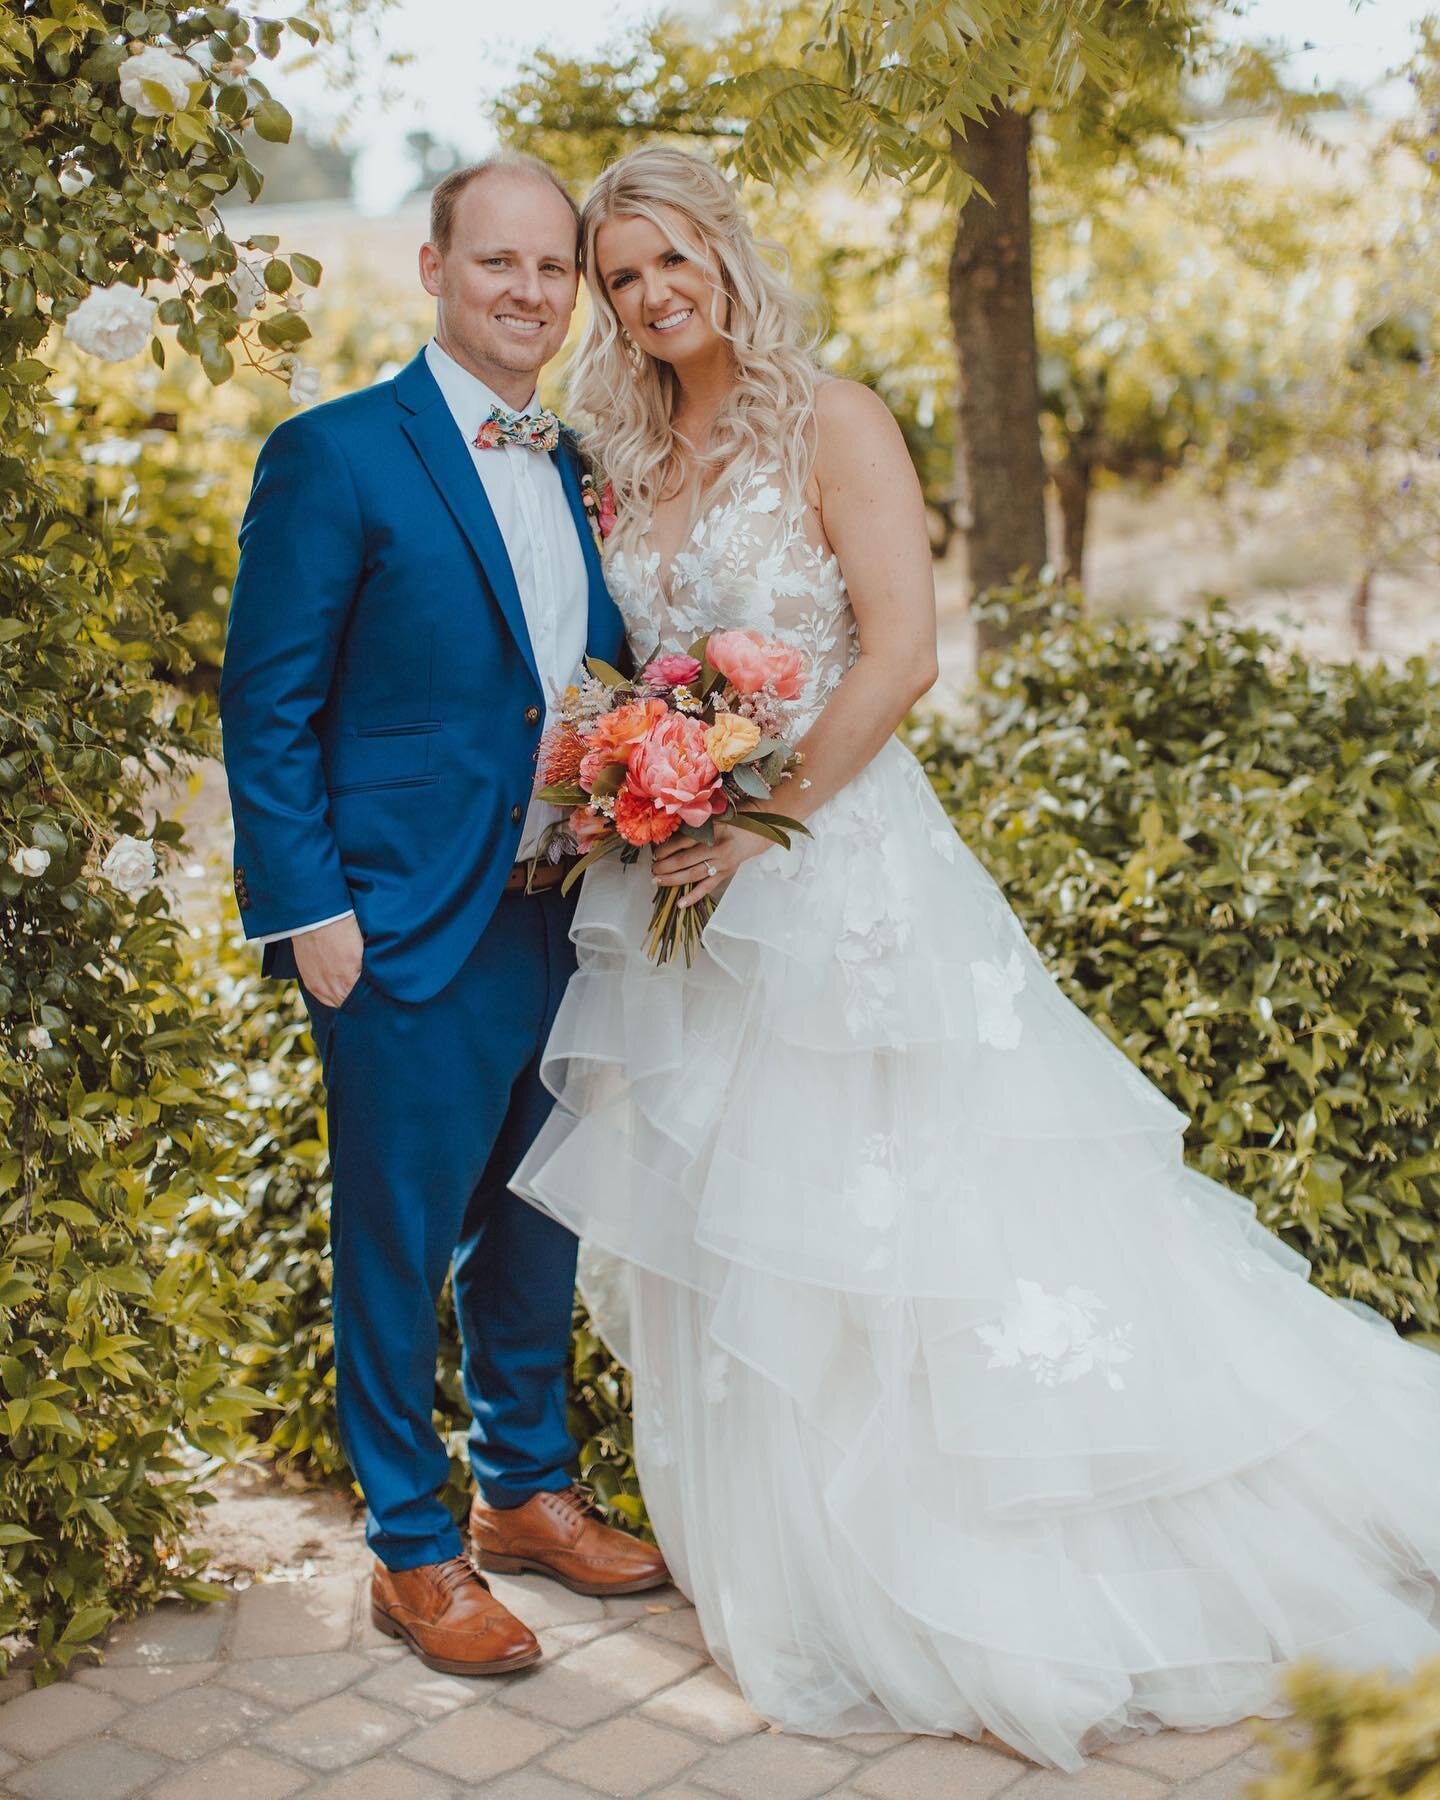 More belated first anniversary wishes for another of last April&rsquo;s couples: Ashley &amp; Tyler. Their wedding day was full of fun, laughter, and color, along with great food and a hoppin&rsquo; dance floor. I hope your first anniversary included